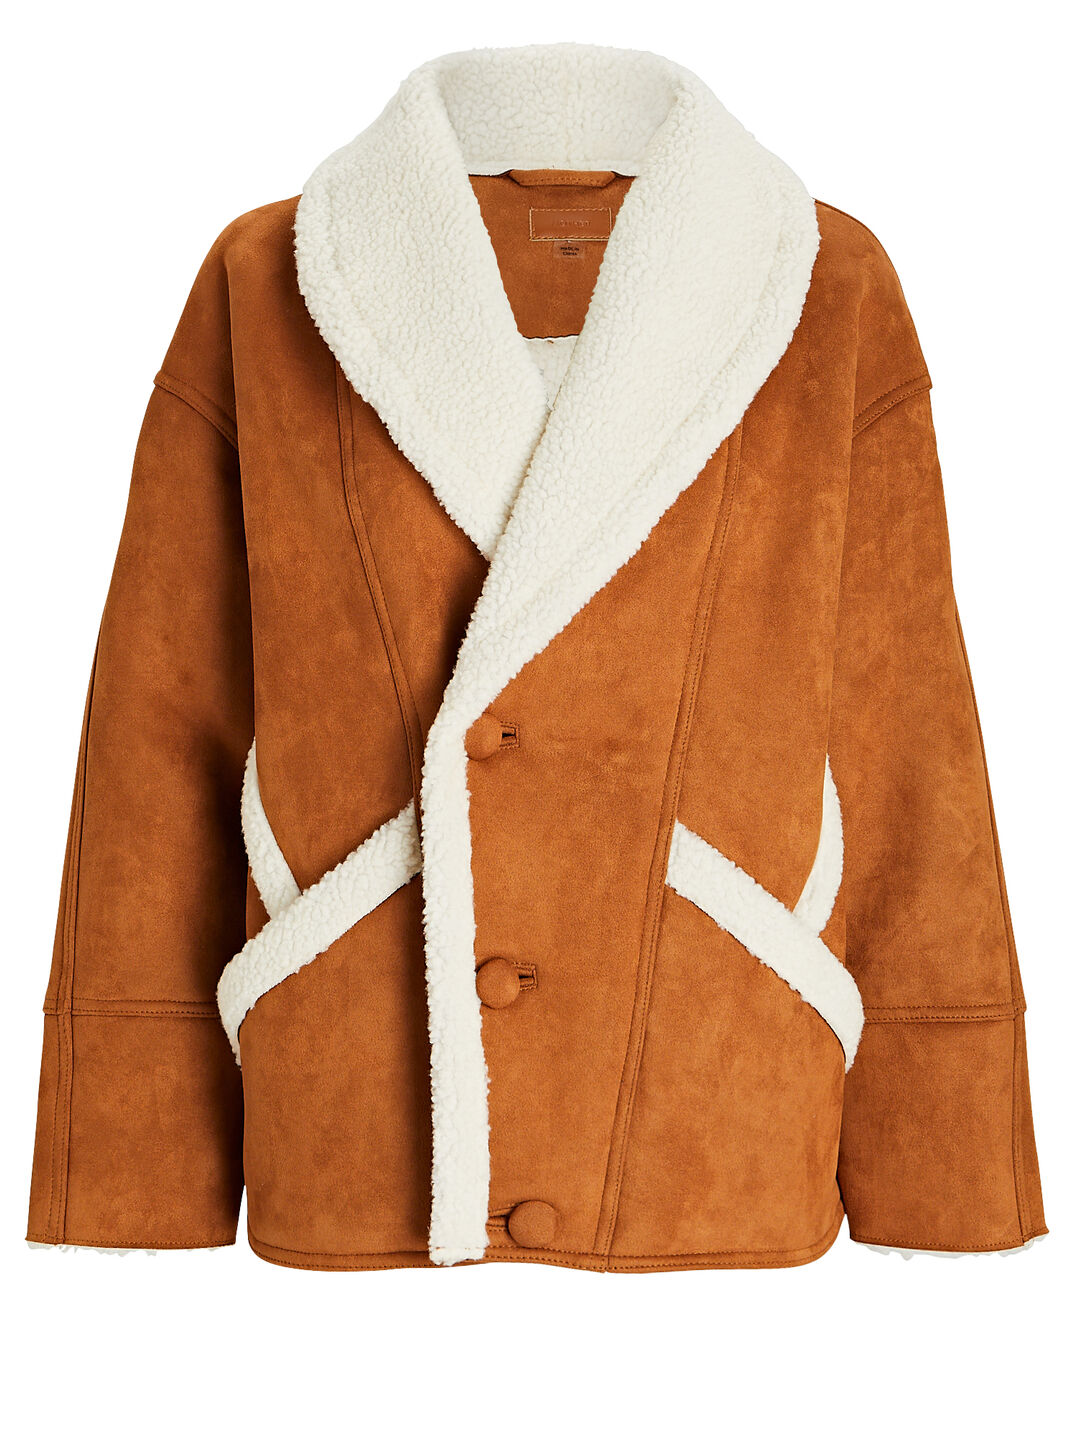 The Brrly Faux Shearling Coat